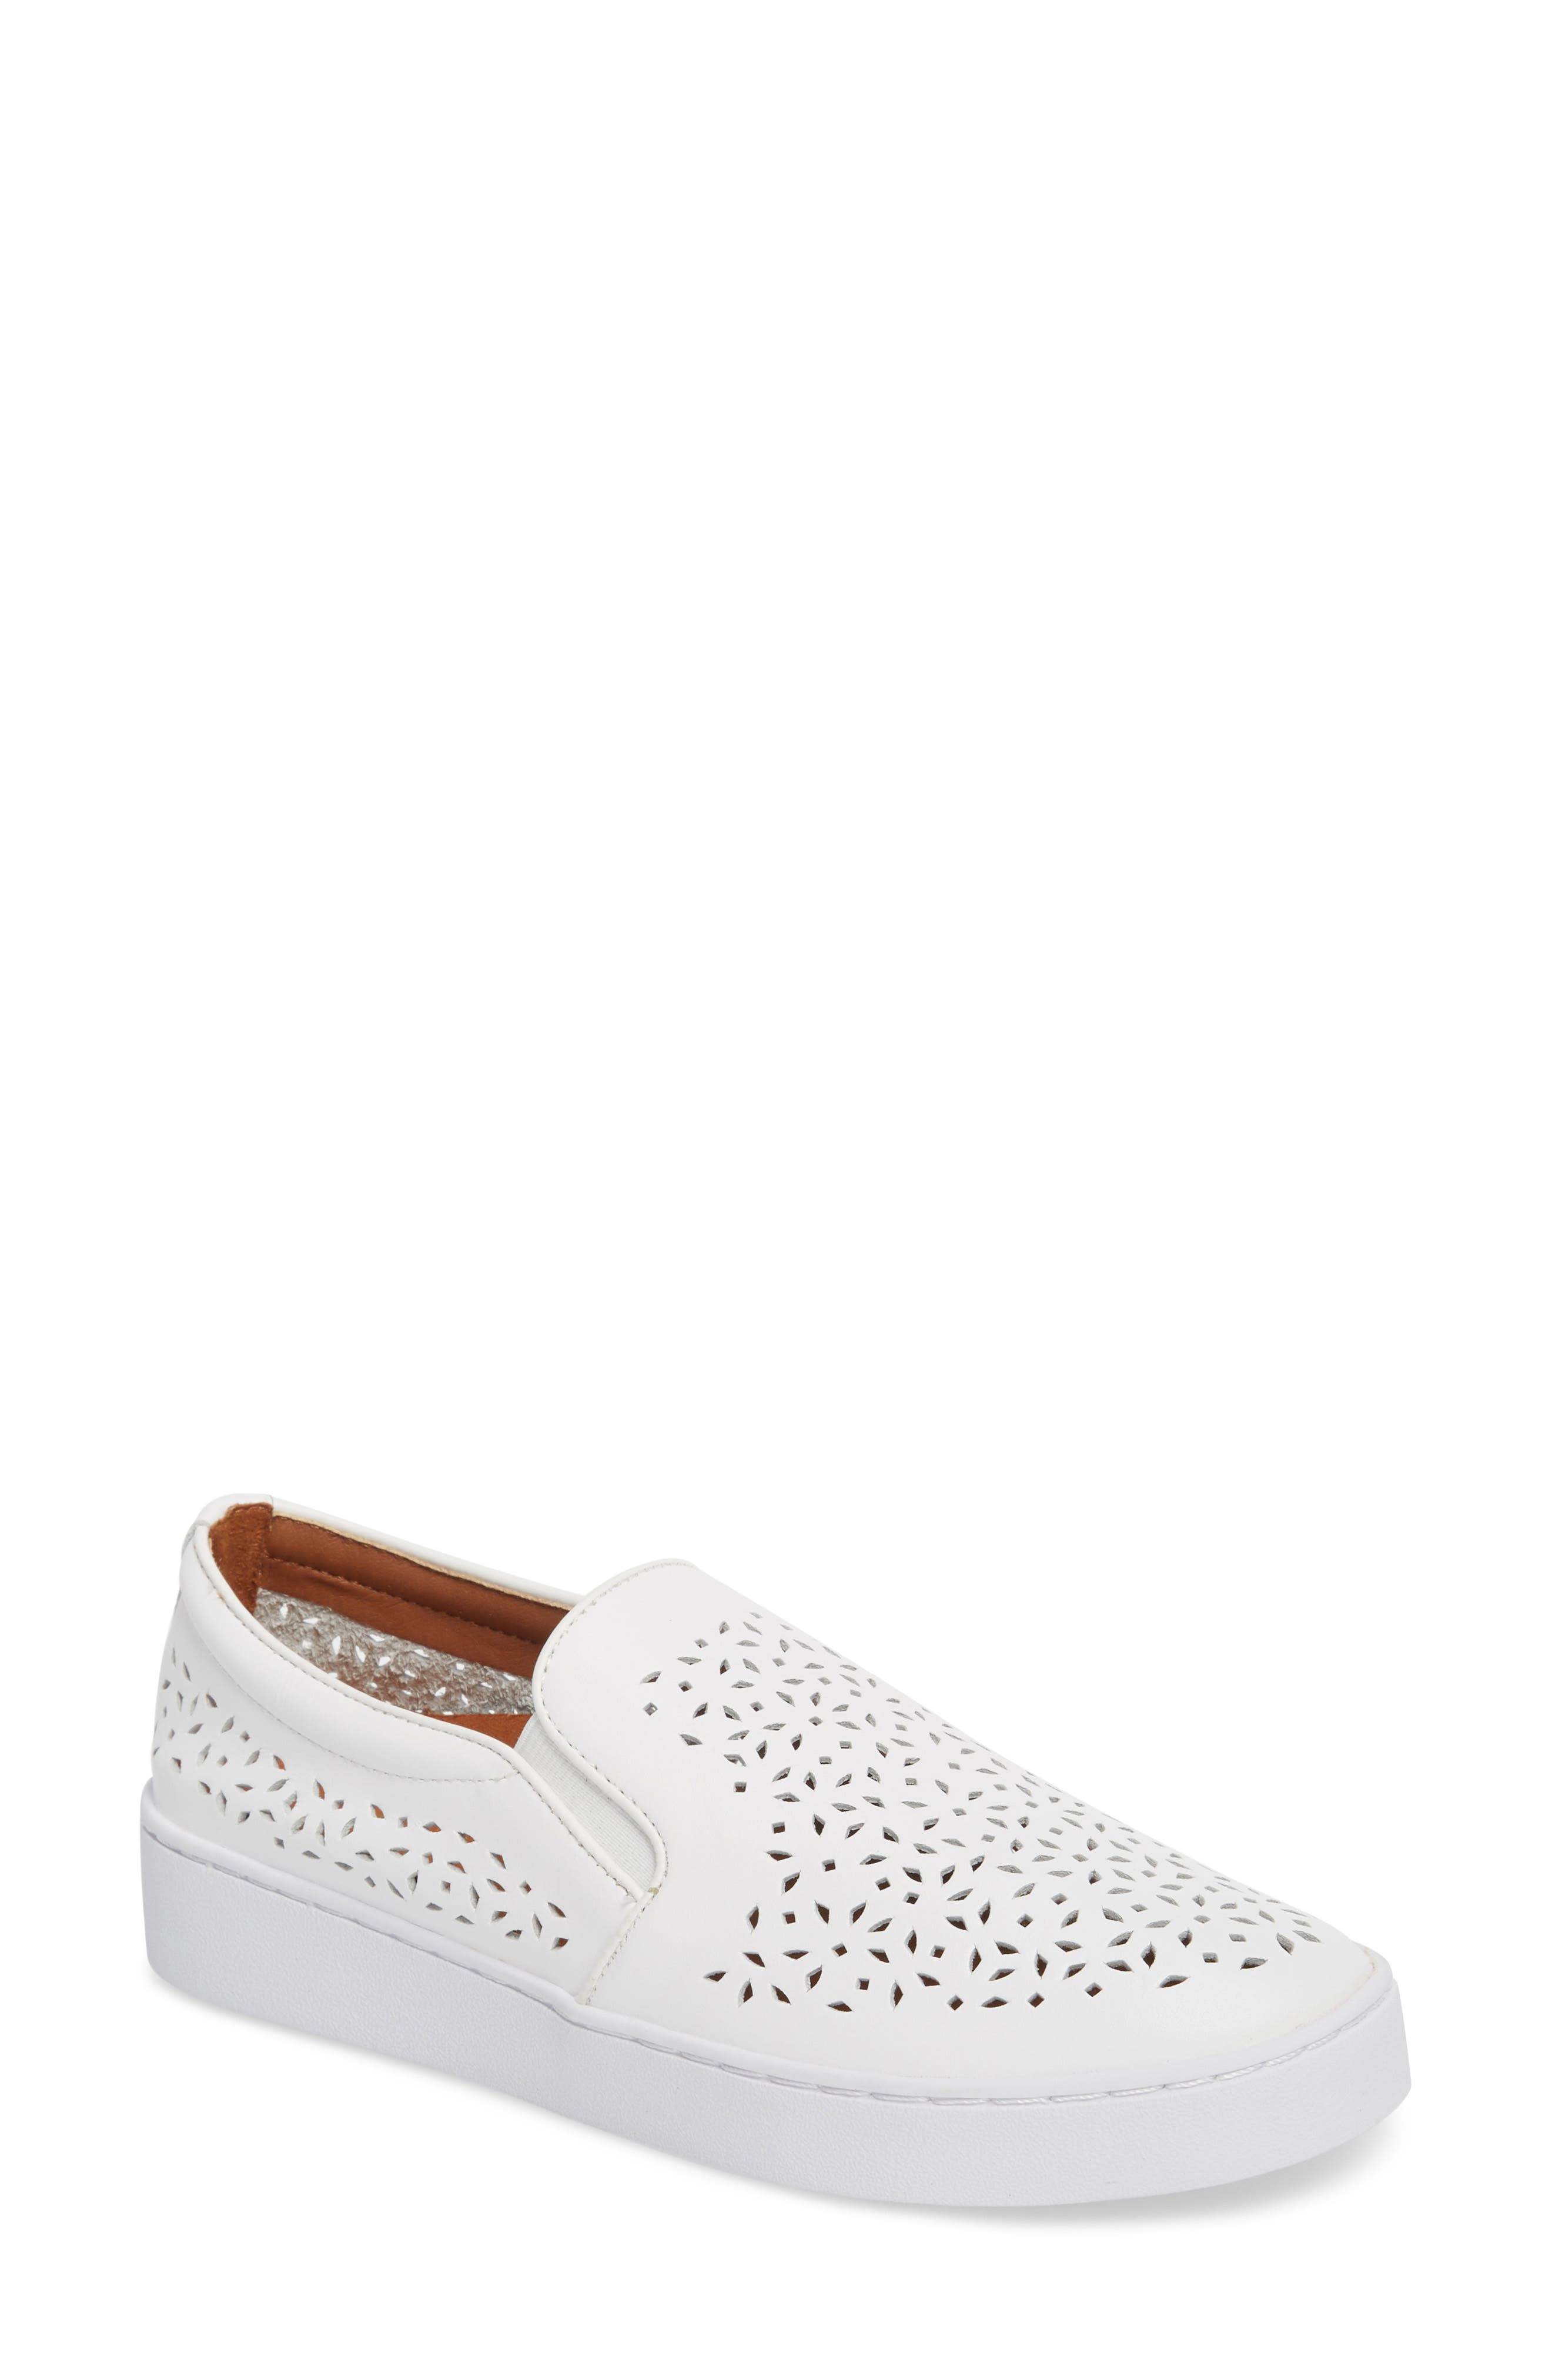 Vionic Perforated Slip-On Sneaker 